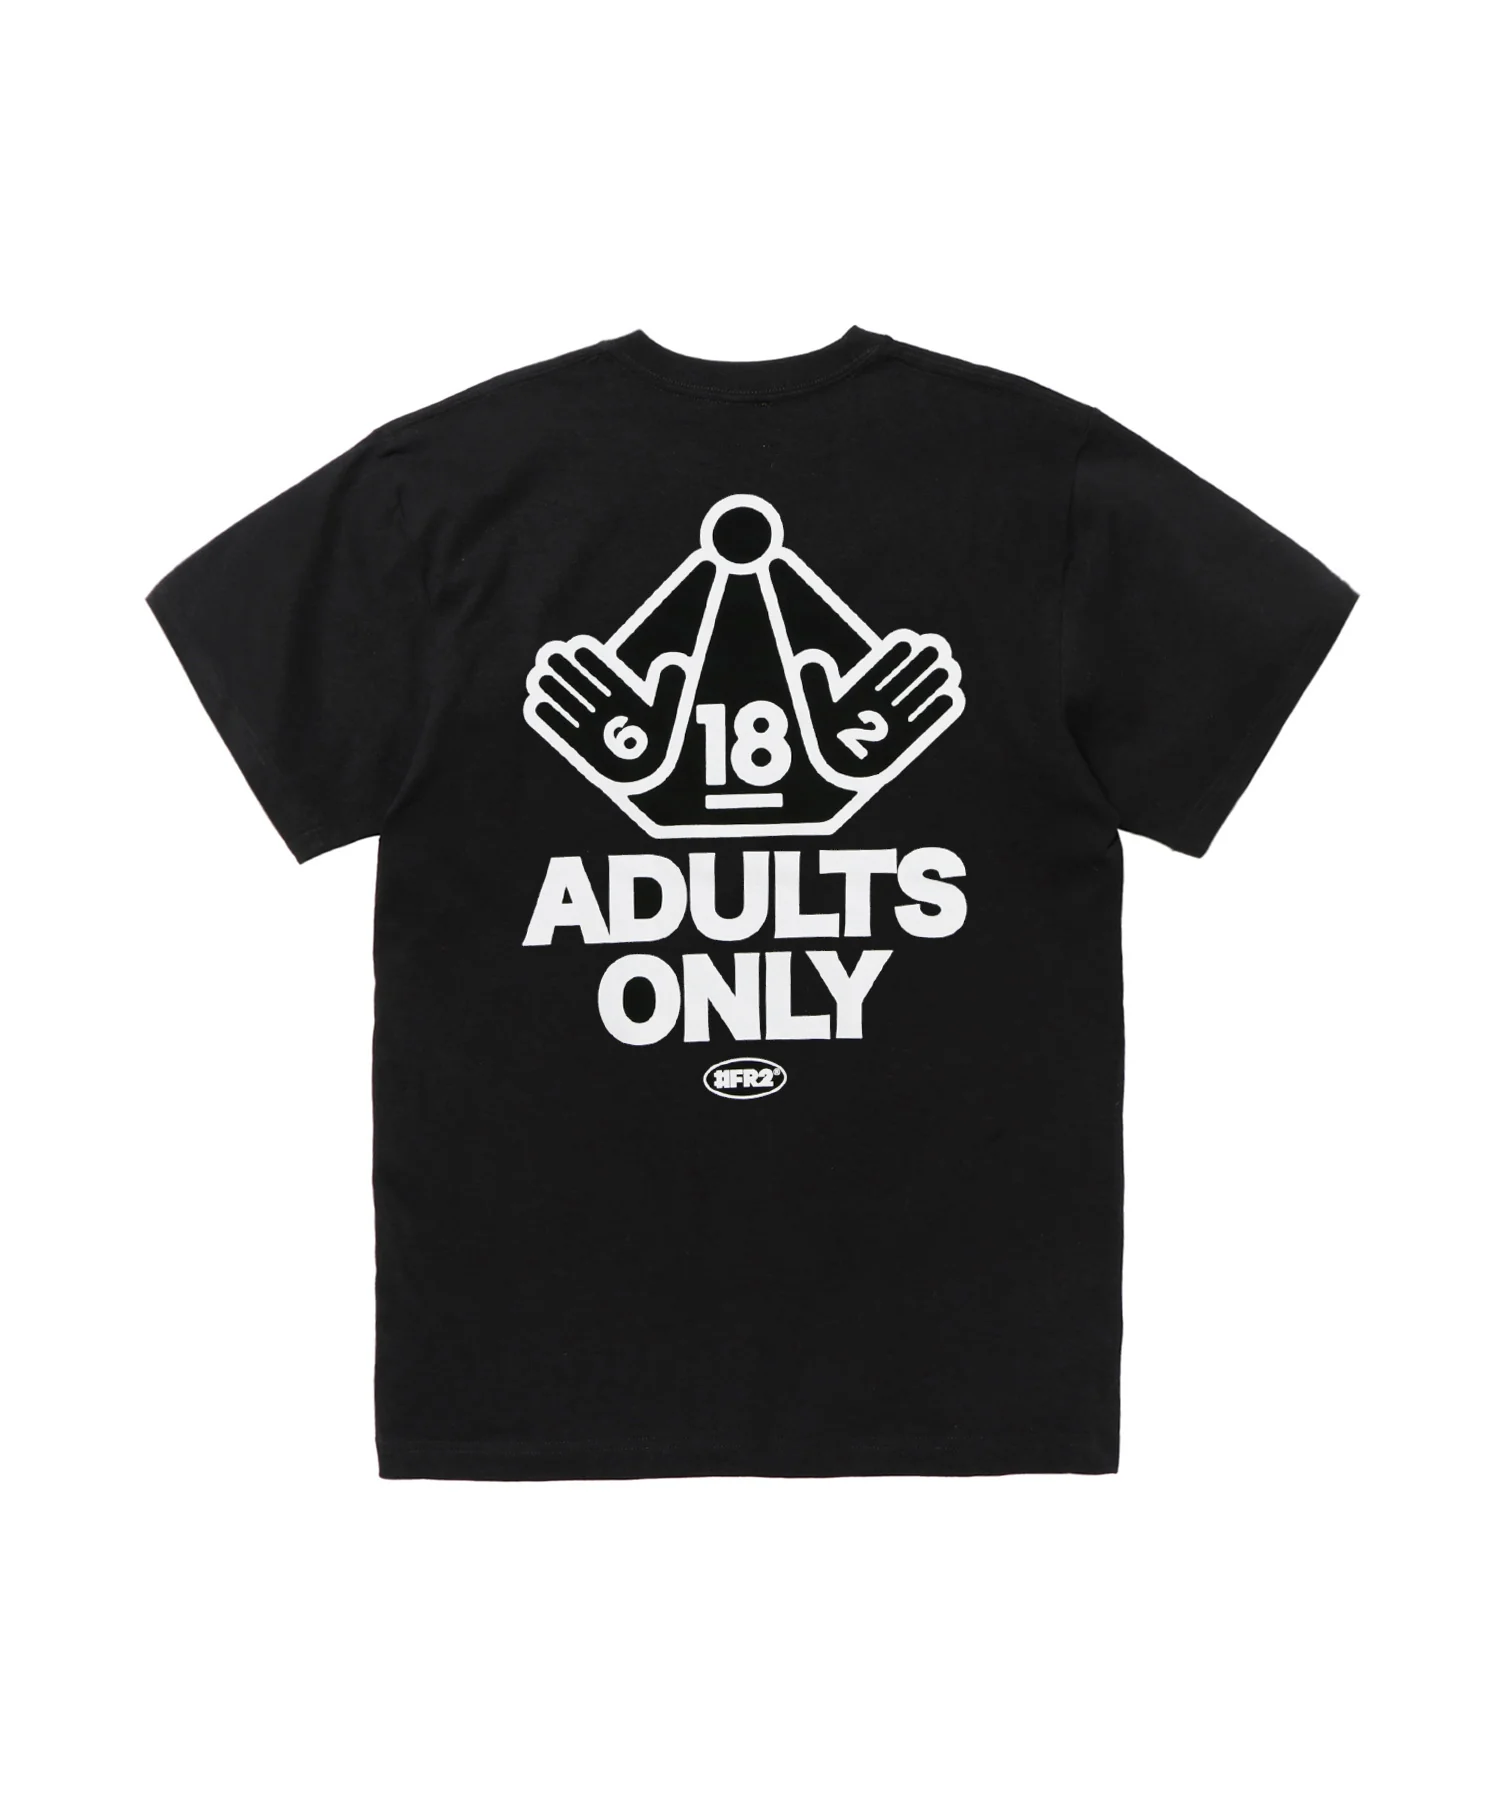 6182 ADULTS ONLY T-shirt[FRC3025]